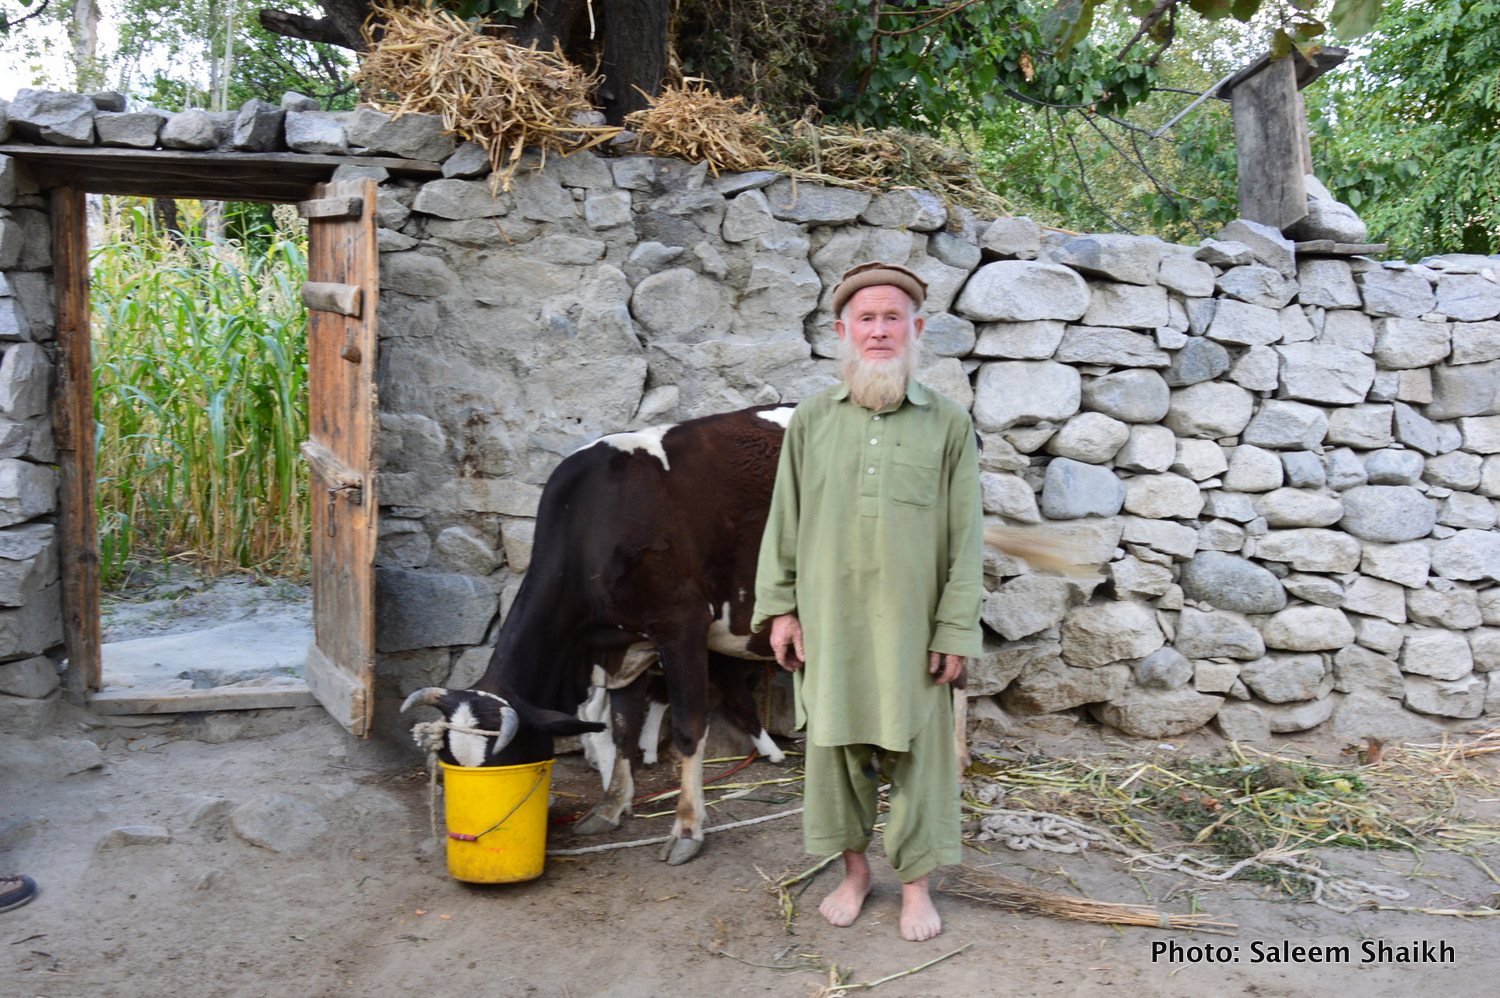 Farmer-turned-herdsman Ishaq Khan, 68, ekes out his livelihood by rearing tow cows and three goats. A single devastating flash flood in 2010 washed away his home, crops and fruit orchards in just one night, plunging him into a vicious cycle of poverty and hunger. It was one late midnight of 6 August in 2010 when sky was heavily overcast with roaring black clouds, which triggered heavy rains non-stop for several hours. While it was raining, what he saw was a roaring flash flood coming down a mountain so fast that he was only able to save his and his family’s lives by fleeing to a higher ground. Photo credit: Saleem Shaikh